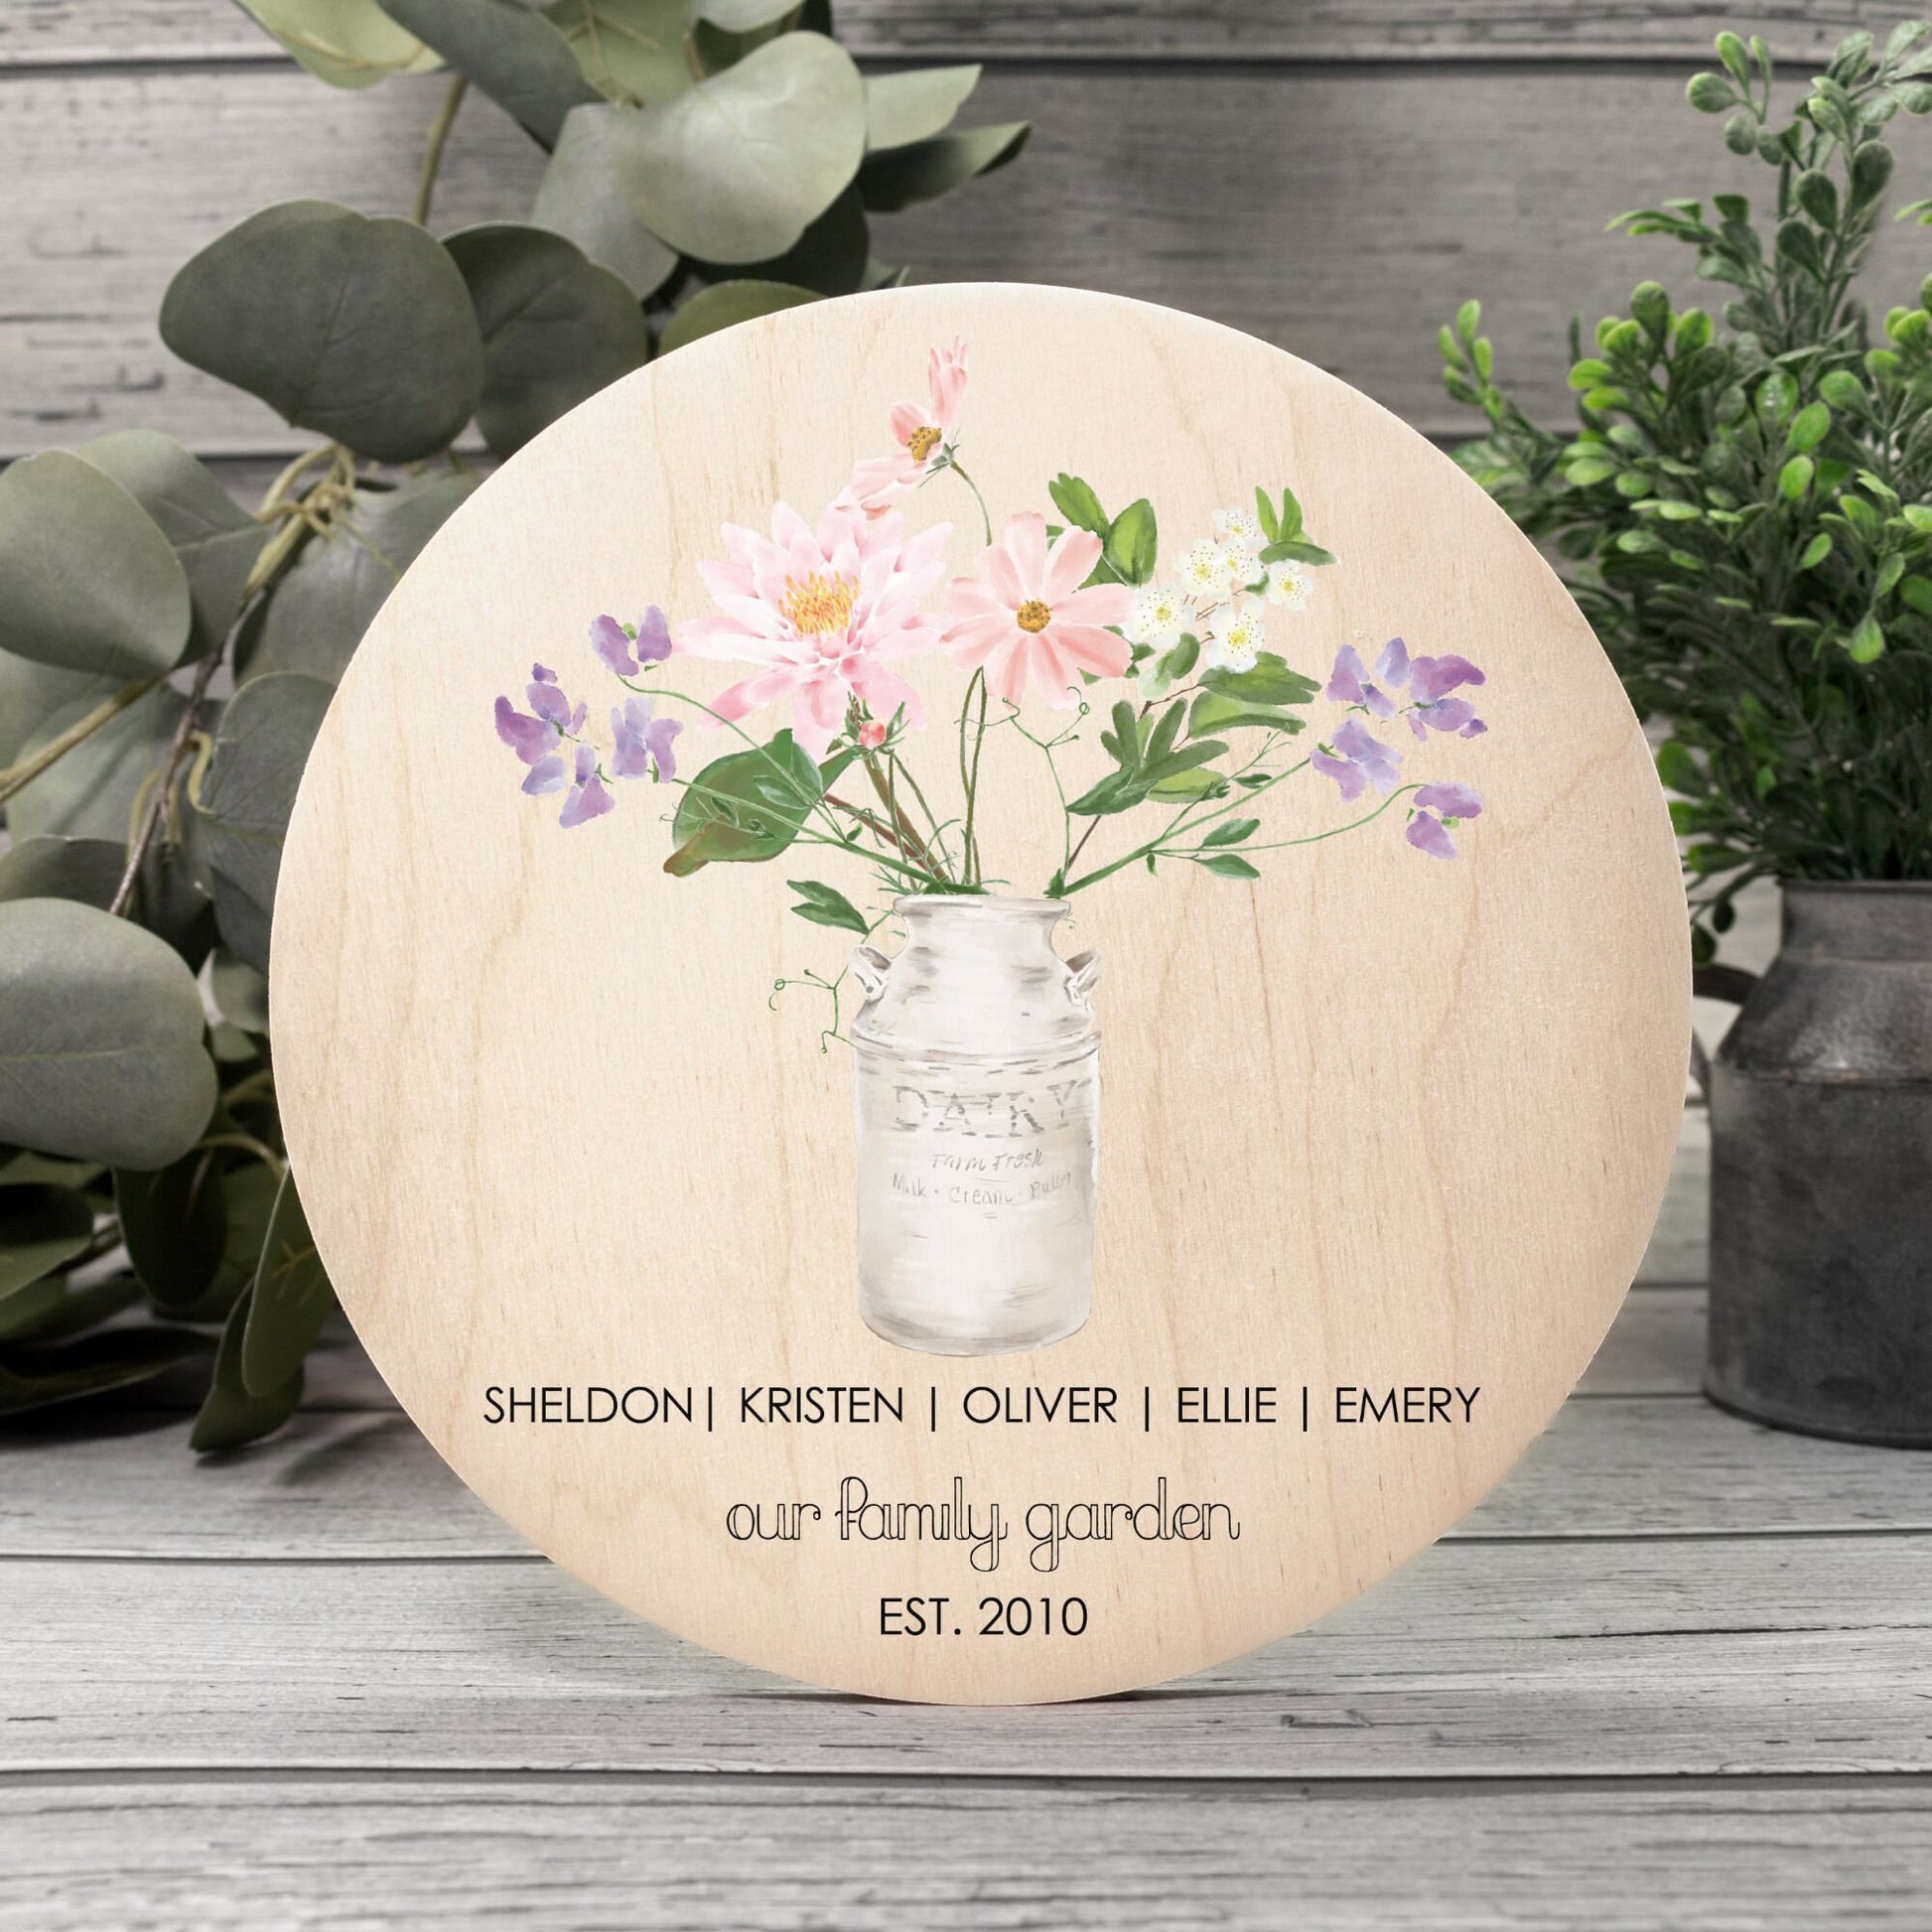 Personalized Gift for Mom | Birth Flower | Our Family Garden | Family Wooden Name Sign | Home Decor Wall Art | Modern Farmhouse Wall Decor